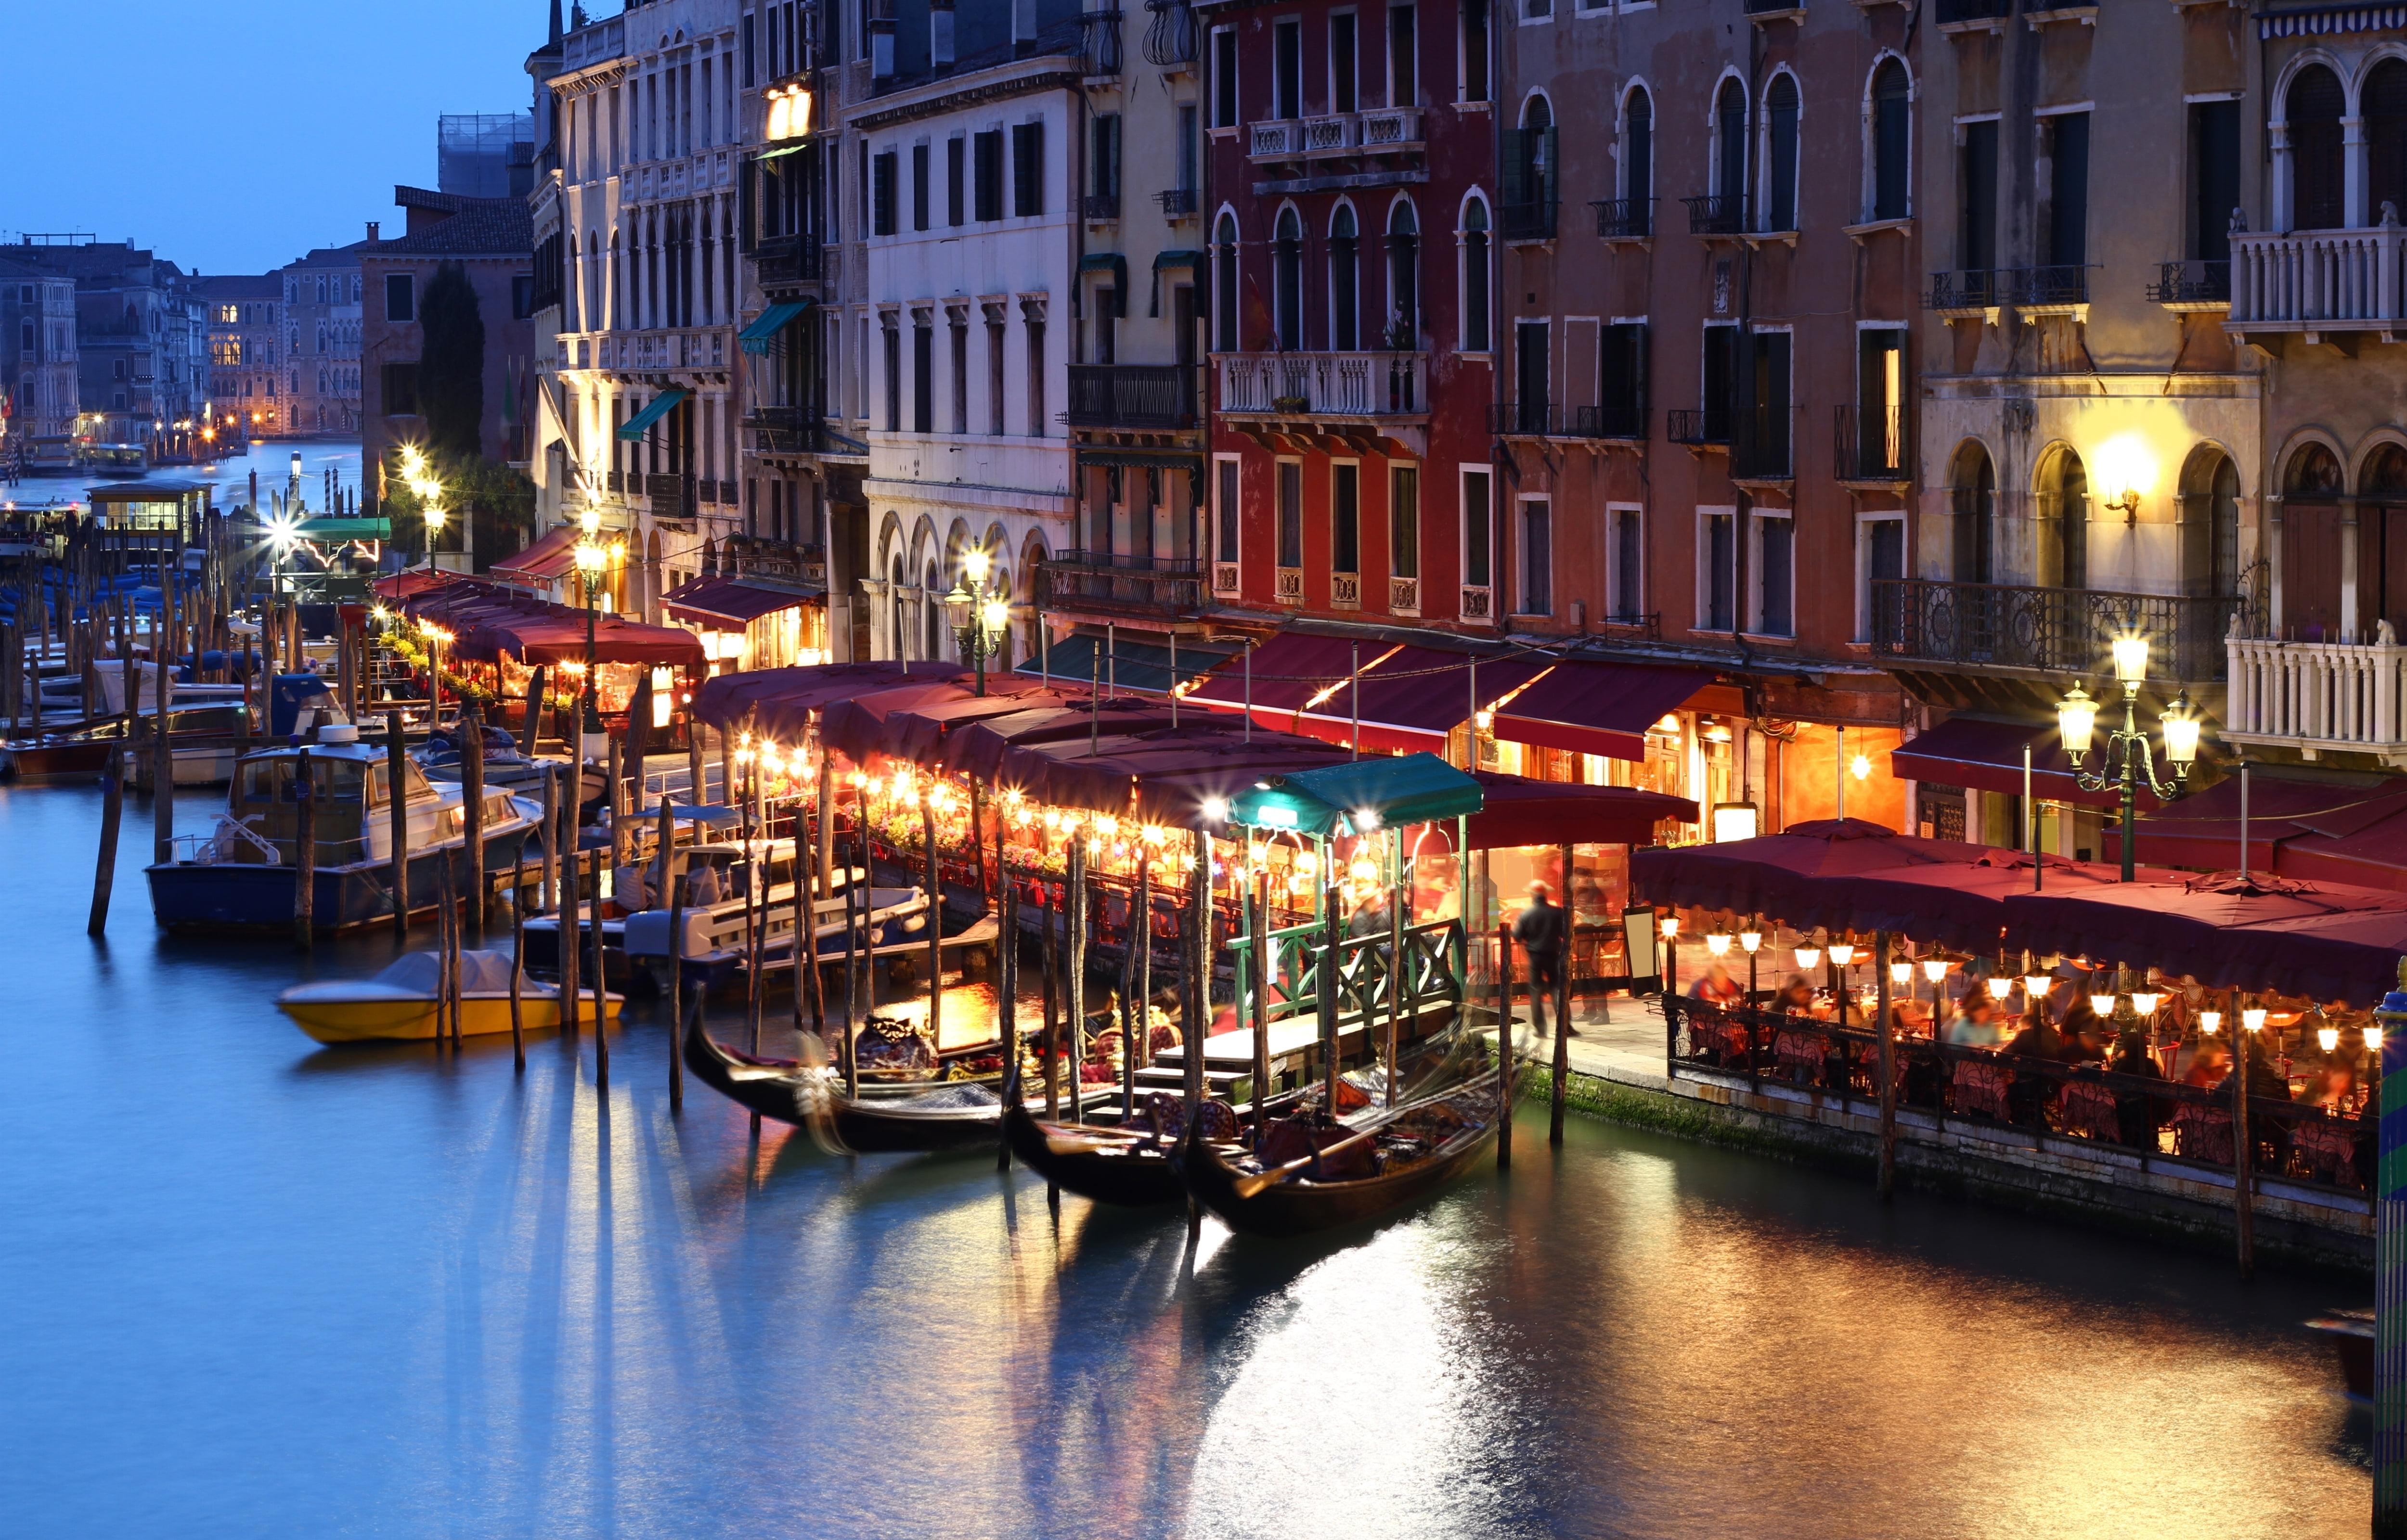 brown boat lot, venice, italy, building, house, evening, cafe